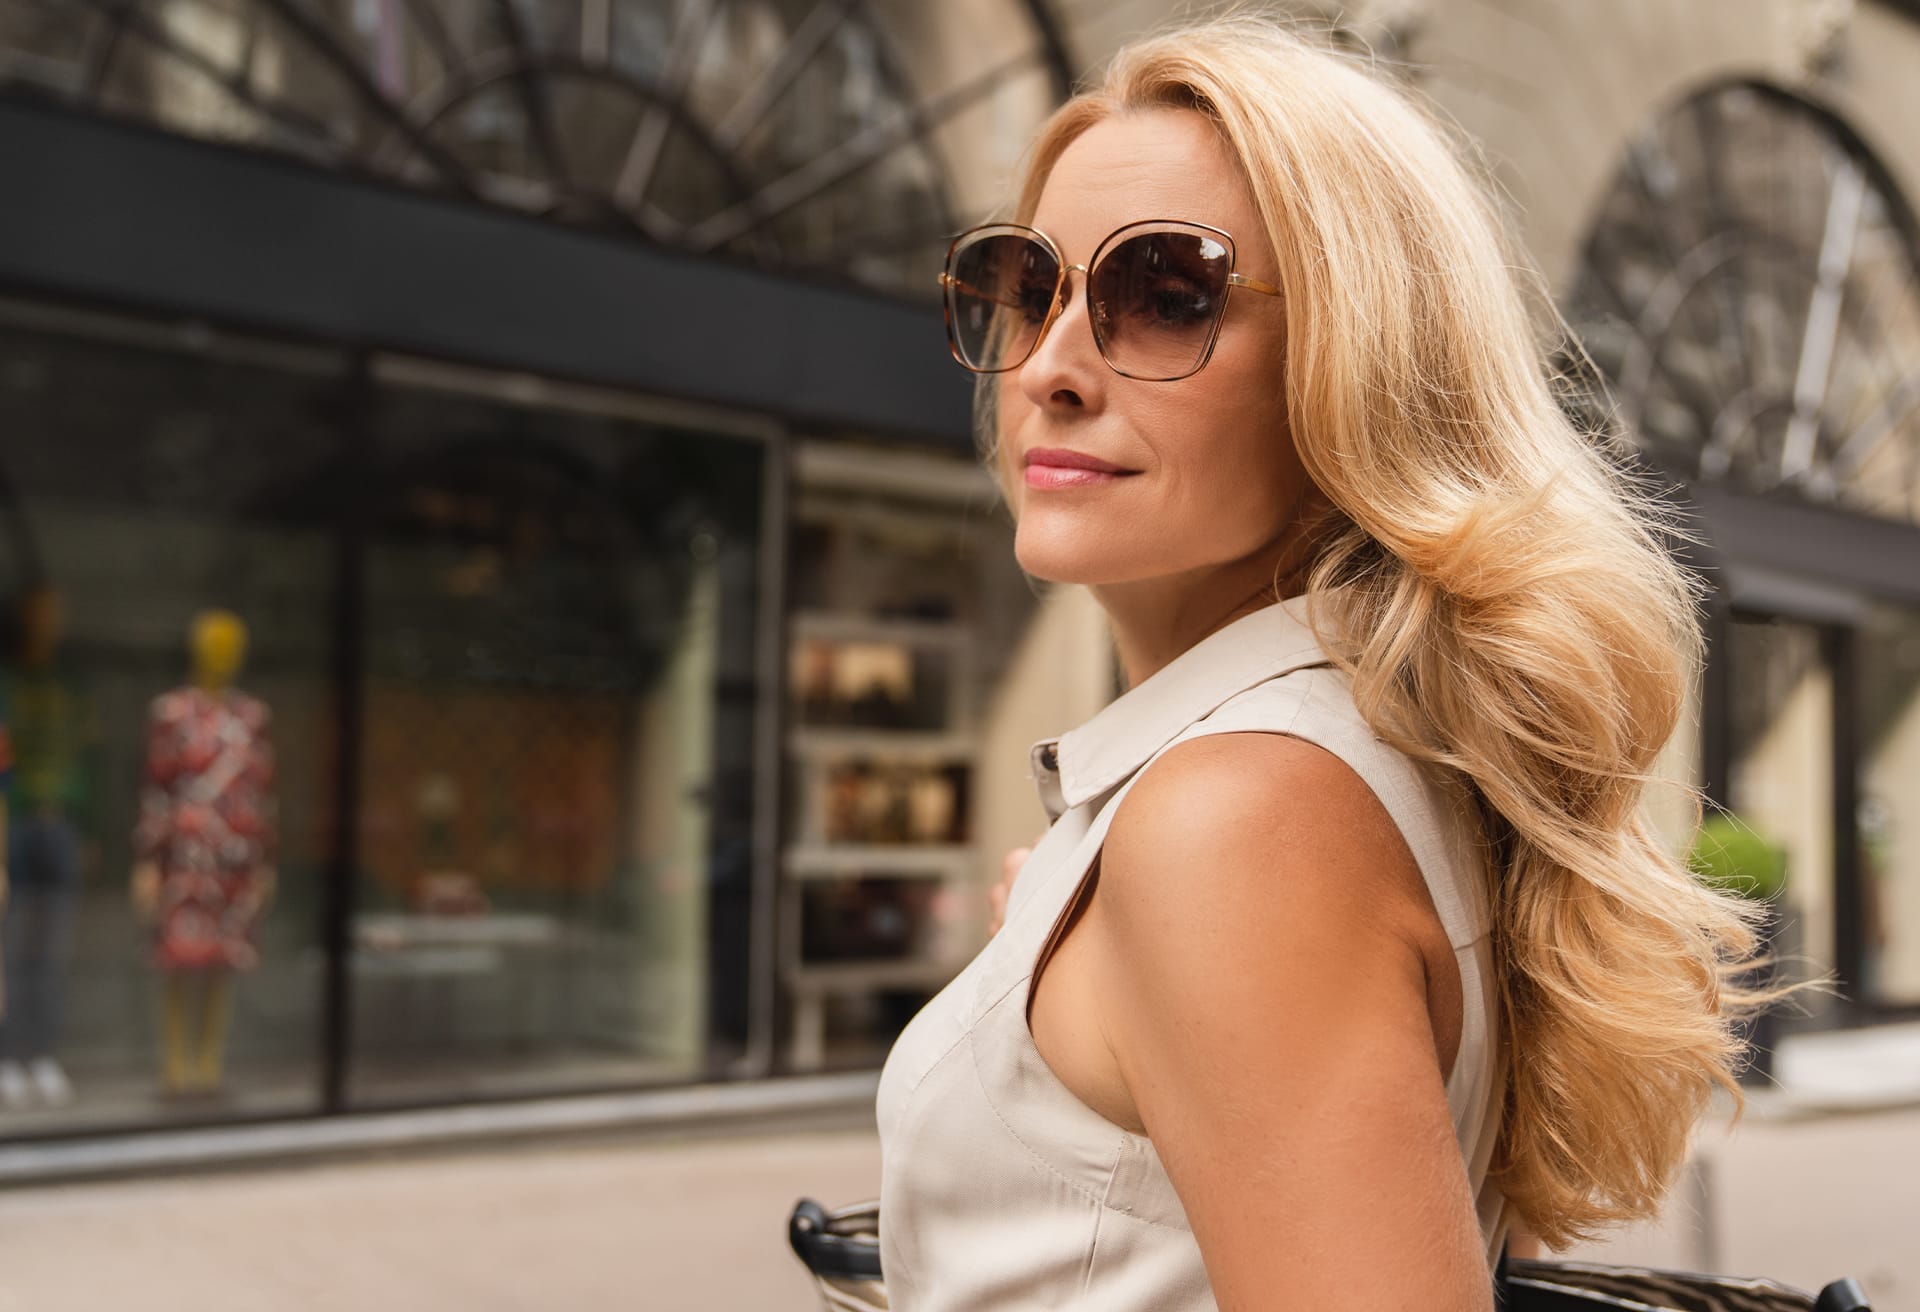 Woman with blonde hair wearing large sunglasses